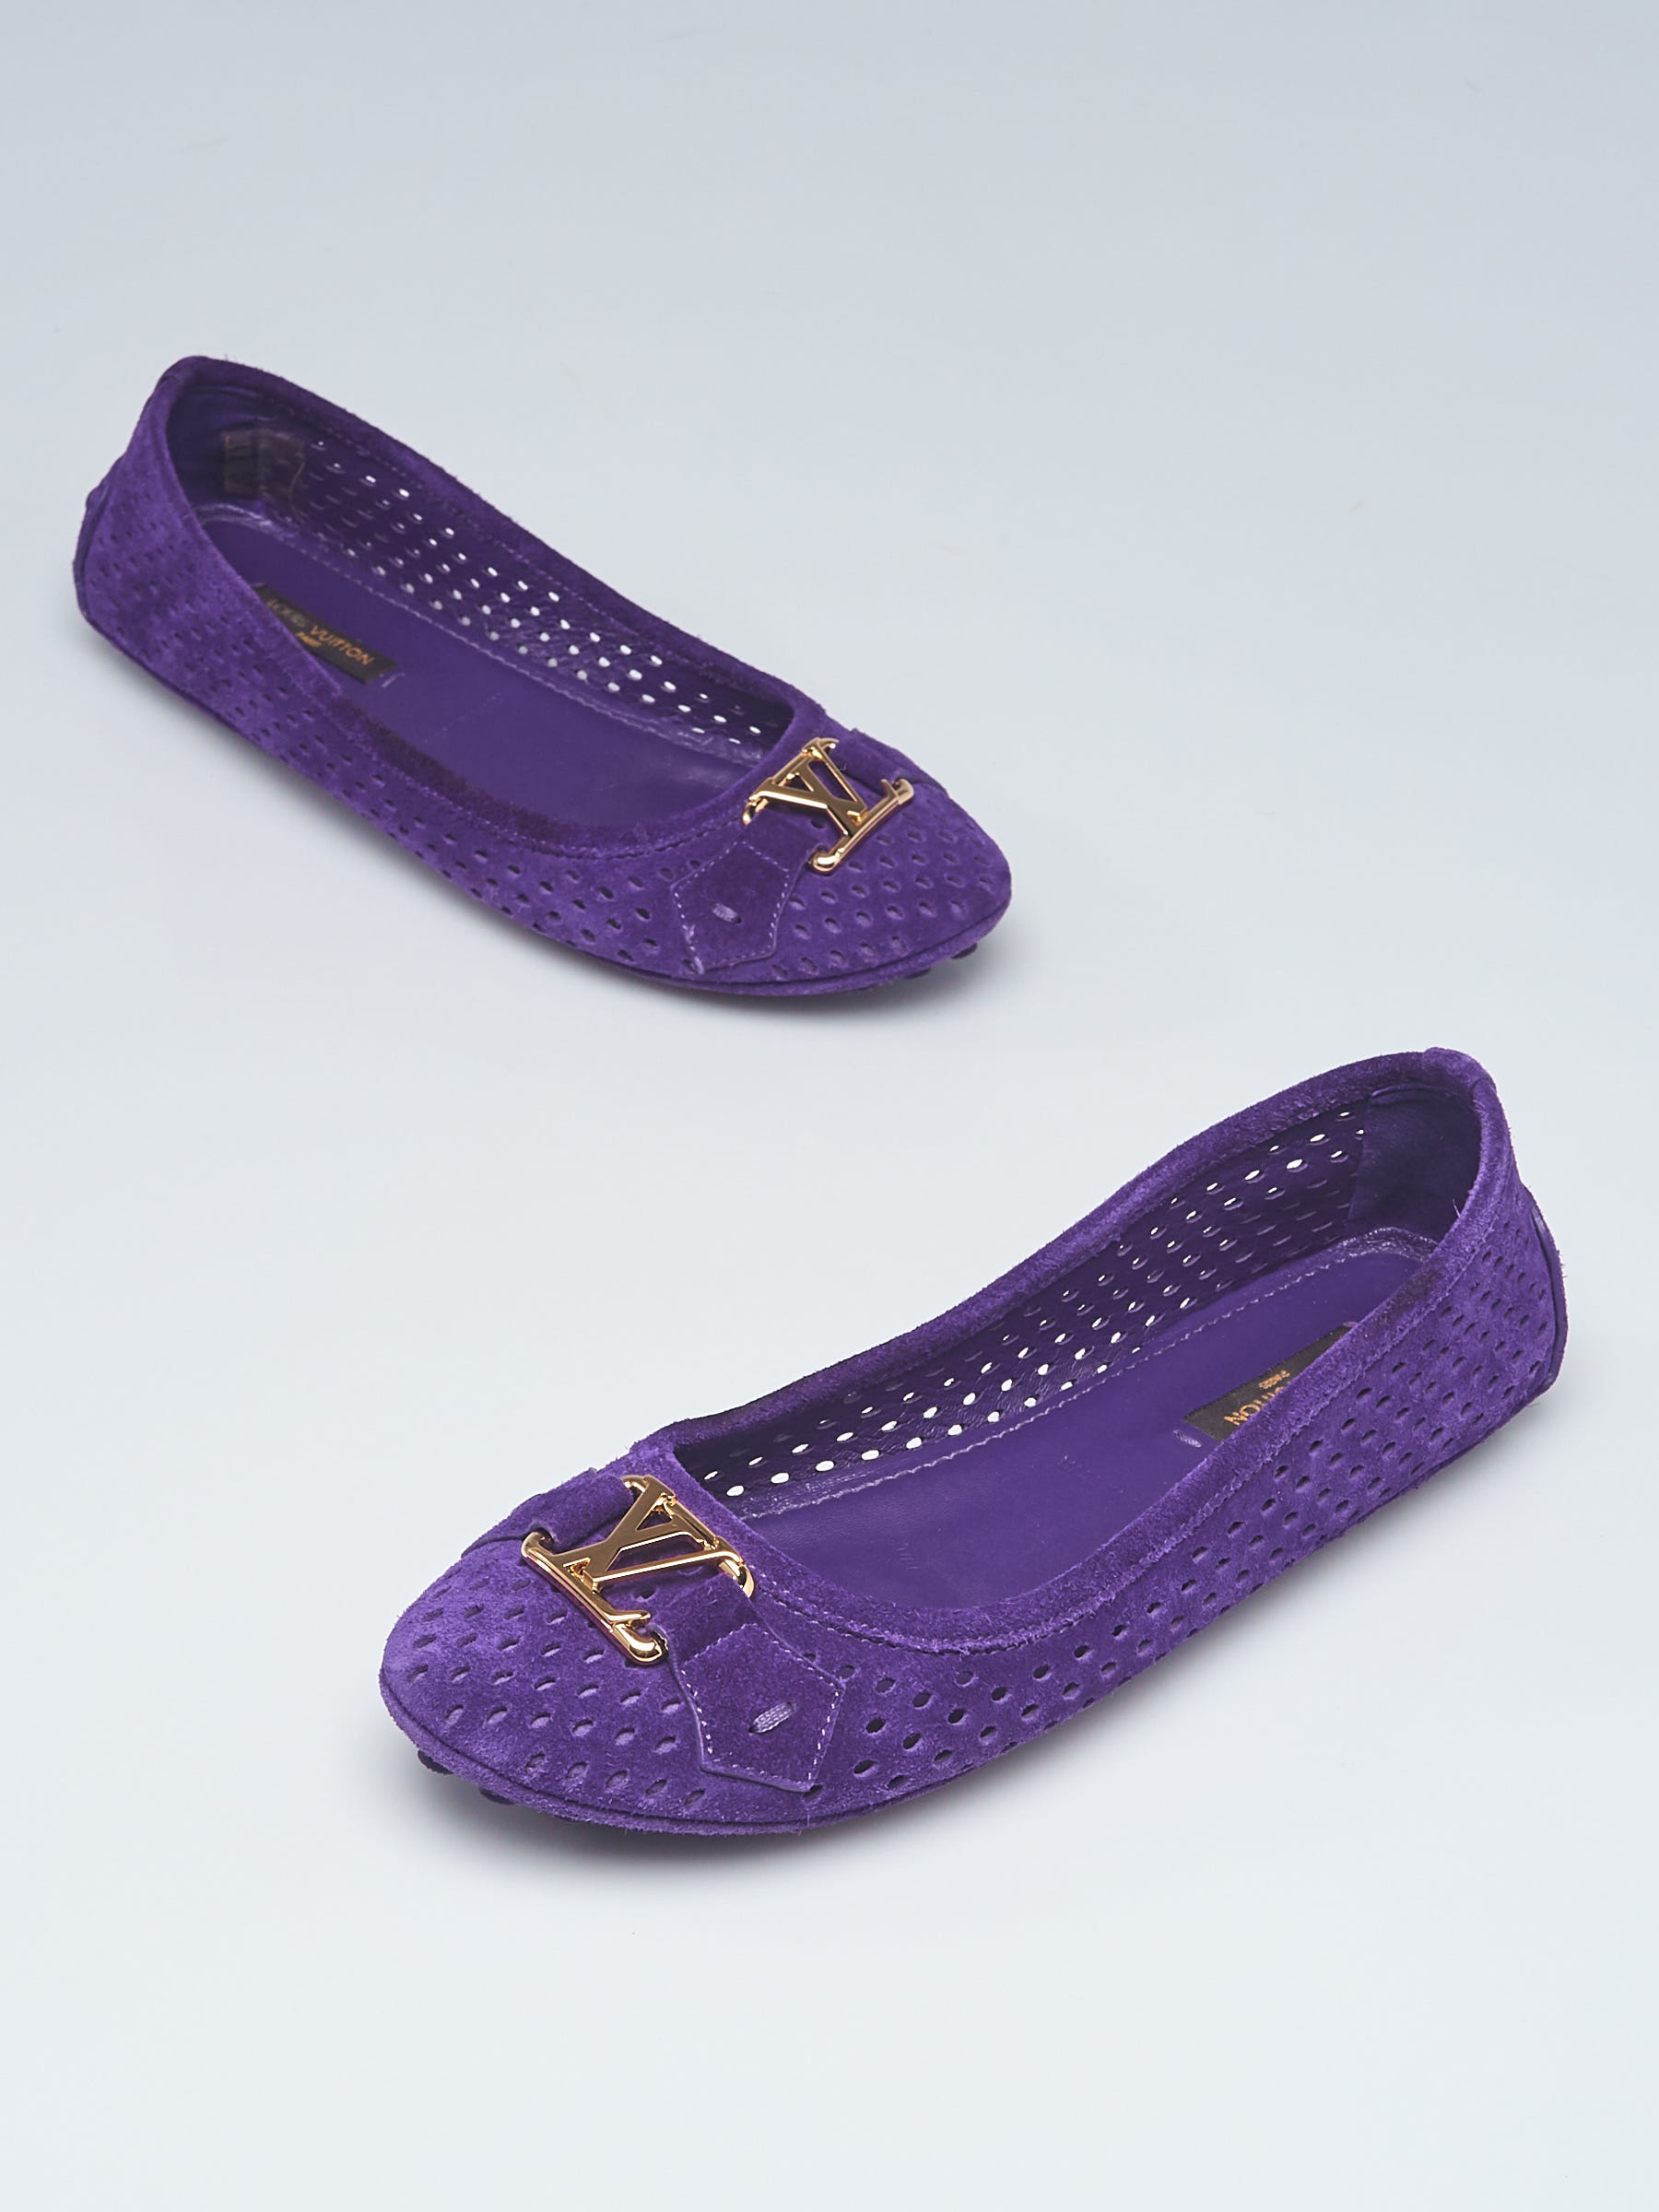 Louis Vuitton Violet Perforated Suede Oxford Ballet Flats Size 4.5